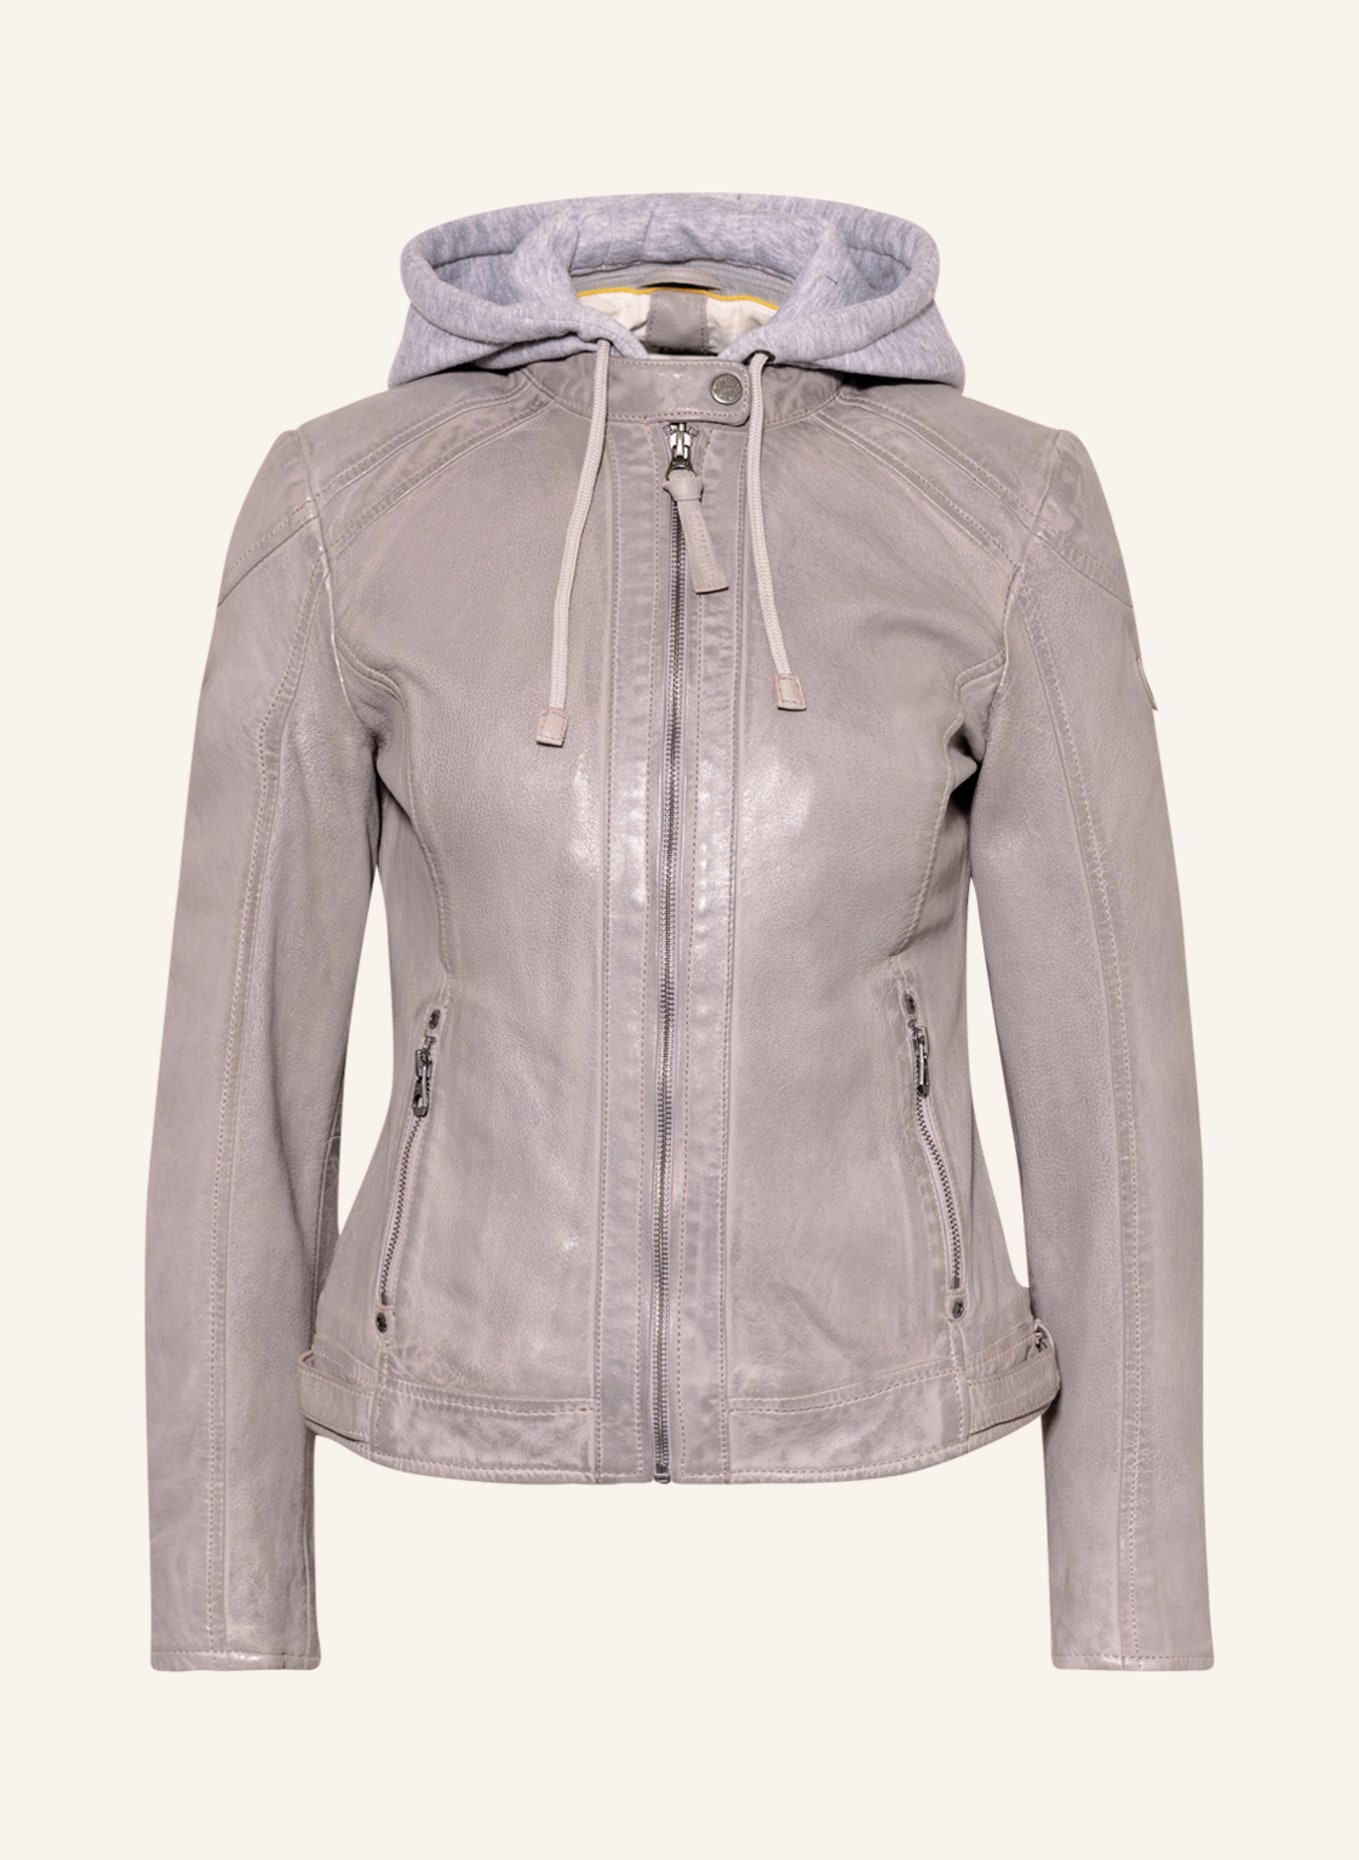 Leather jacket GWALLIE LASOV in mixed materials with detachable trim in gray